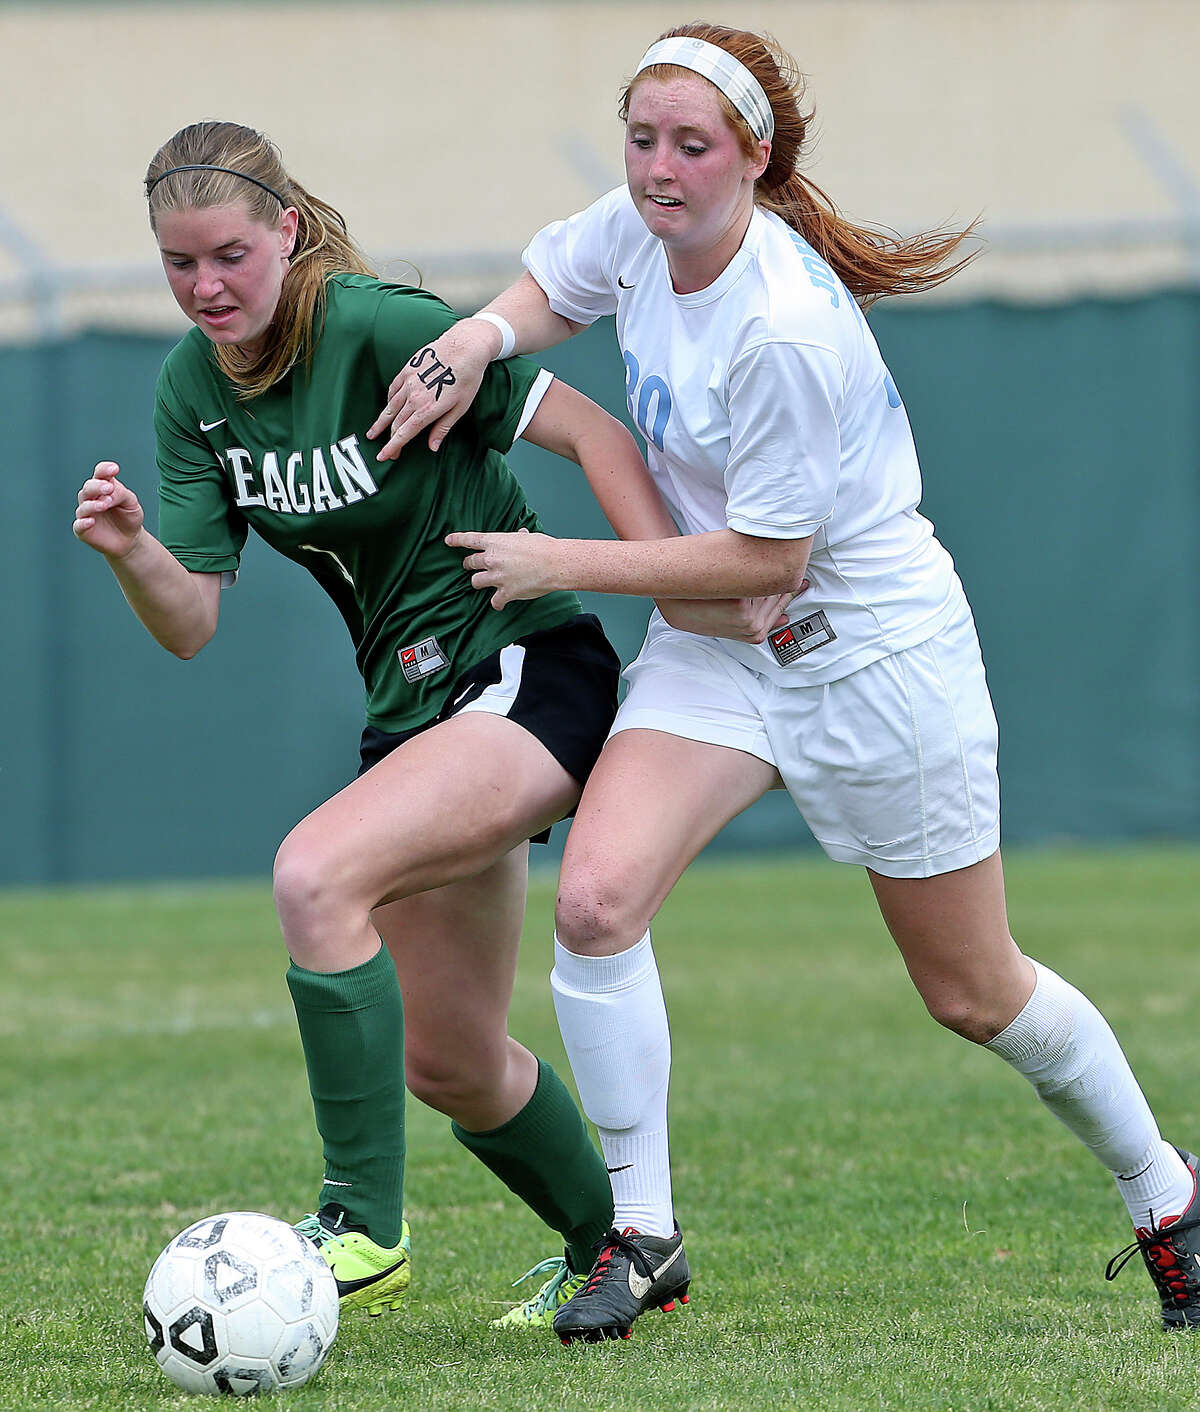 Reagan's Taryn Sherman is pressured by Amber Stearns as Johnson plays Reagan in a 26-5A girls soccer match at Northeast Soccer Stadium on March 14, 2014.